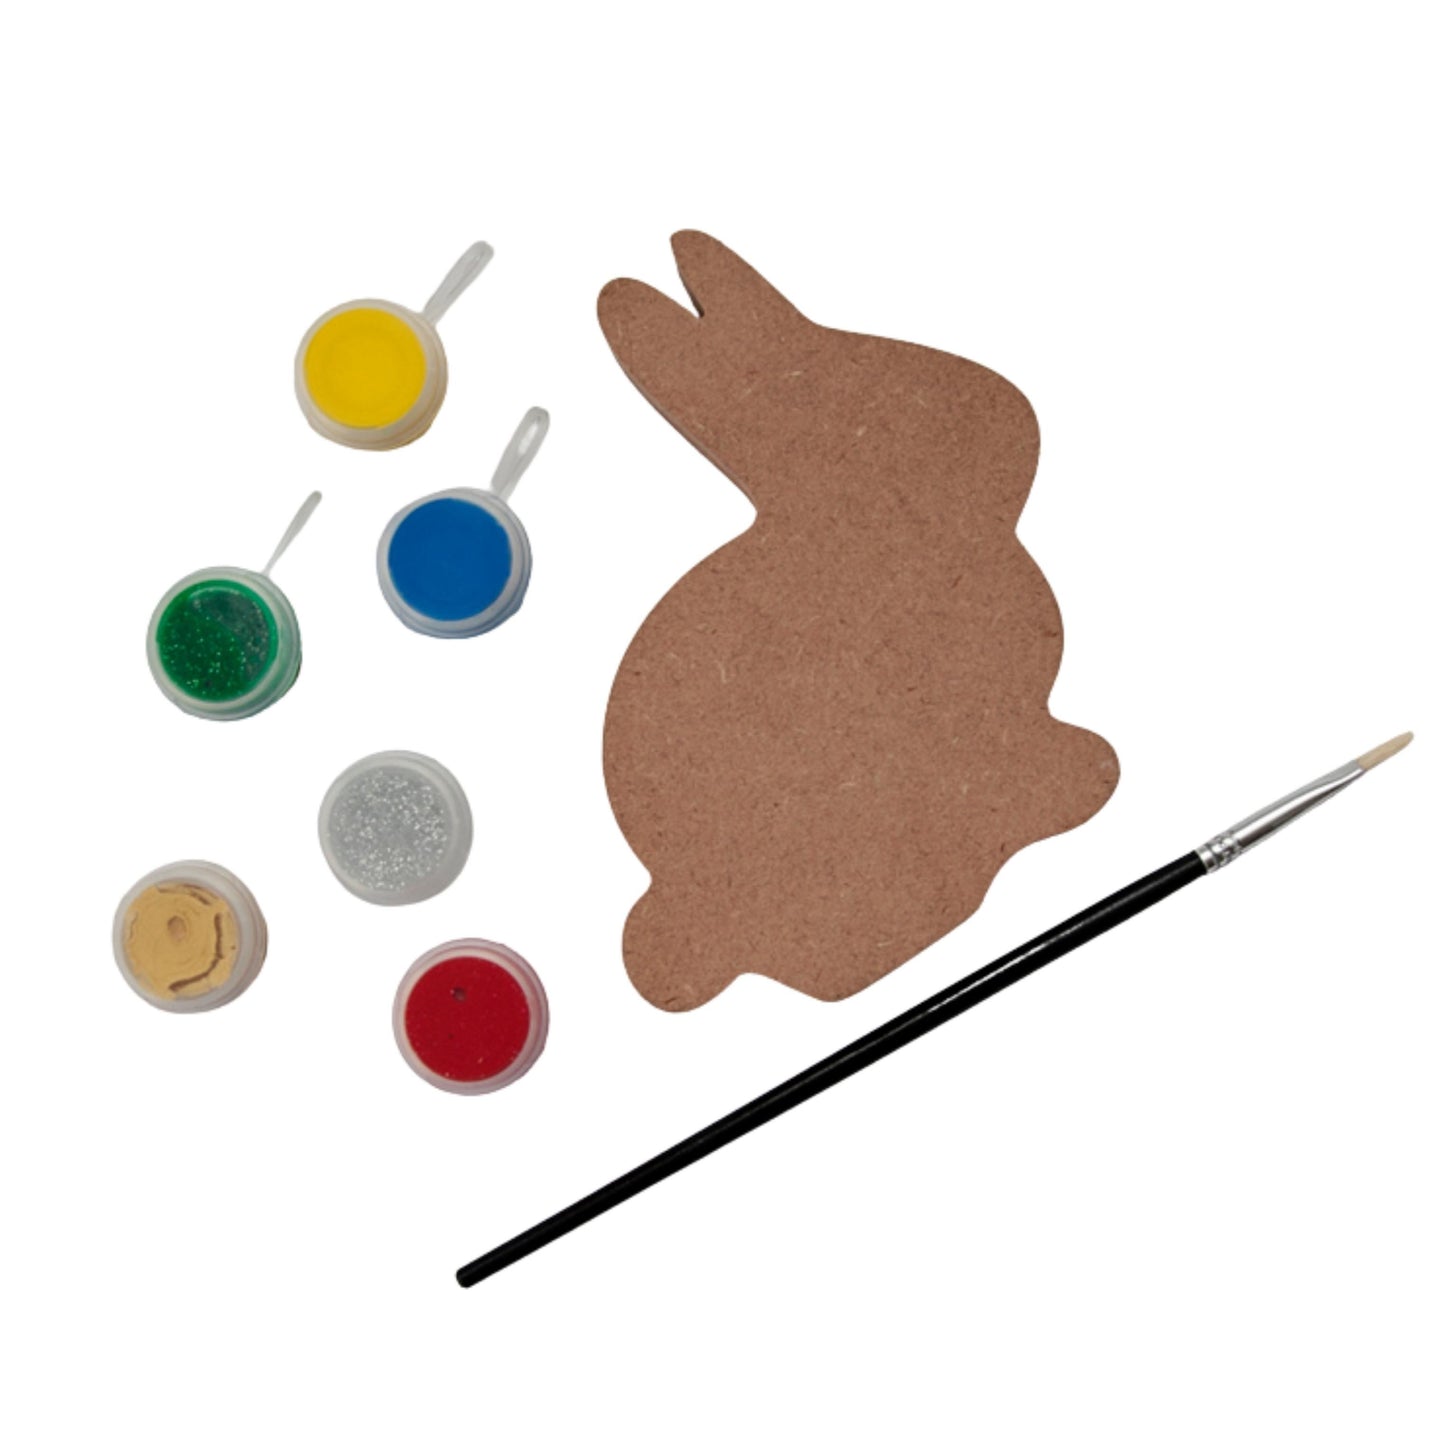 Decorate Your Own Wooden Bunny